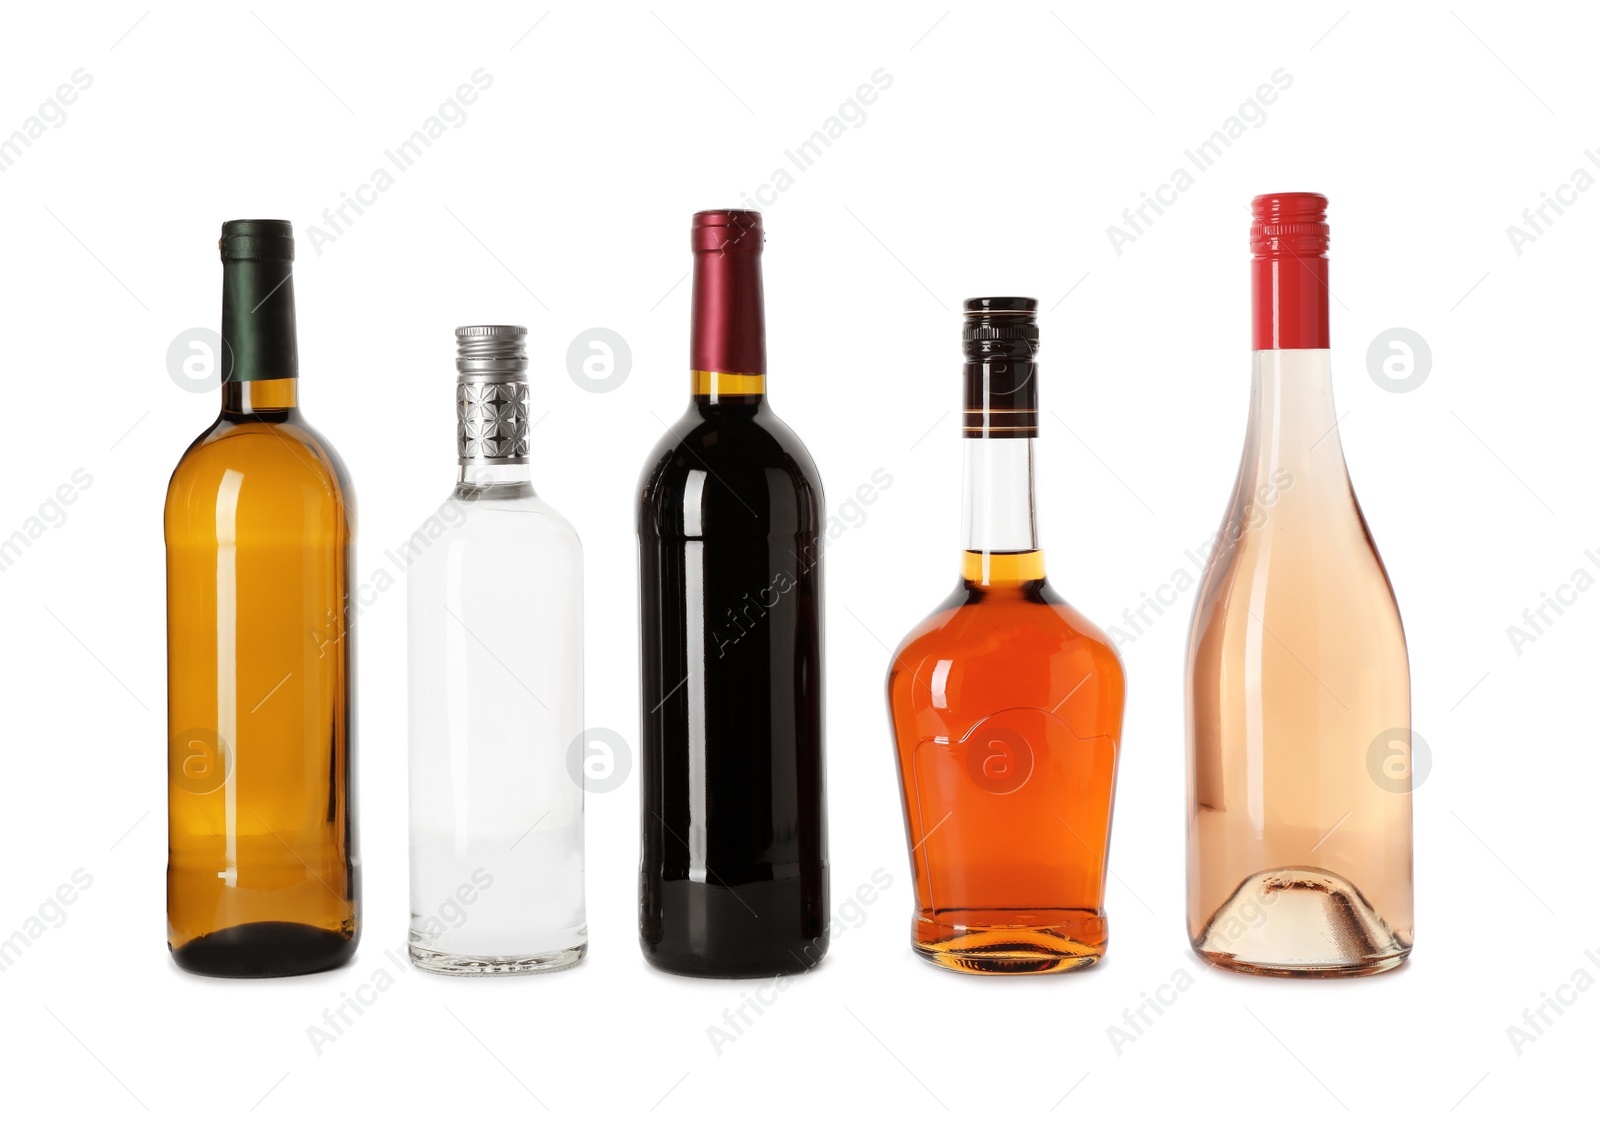 Photo of Bottles with different alcoholic drinks on white background